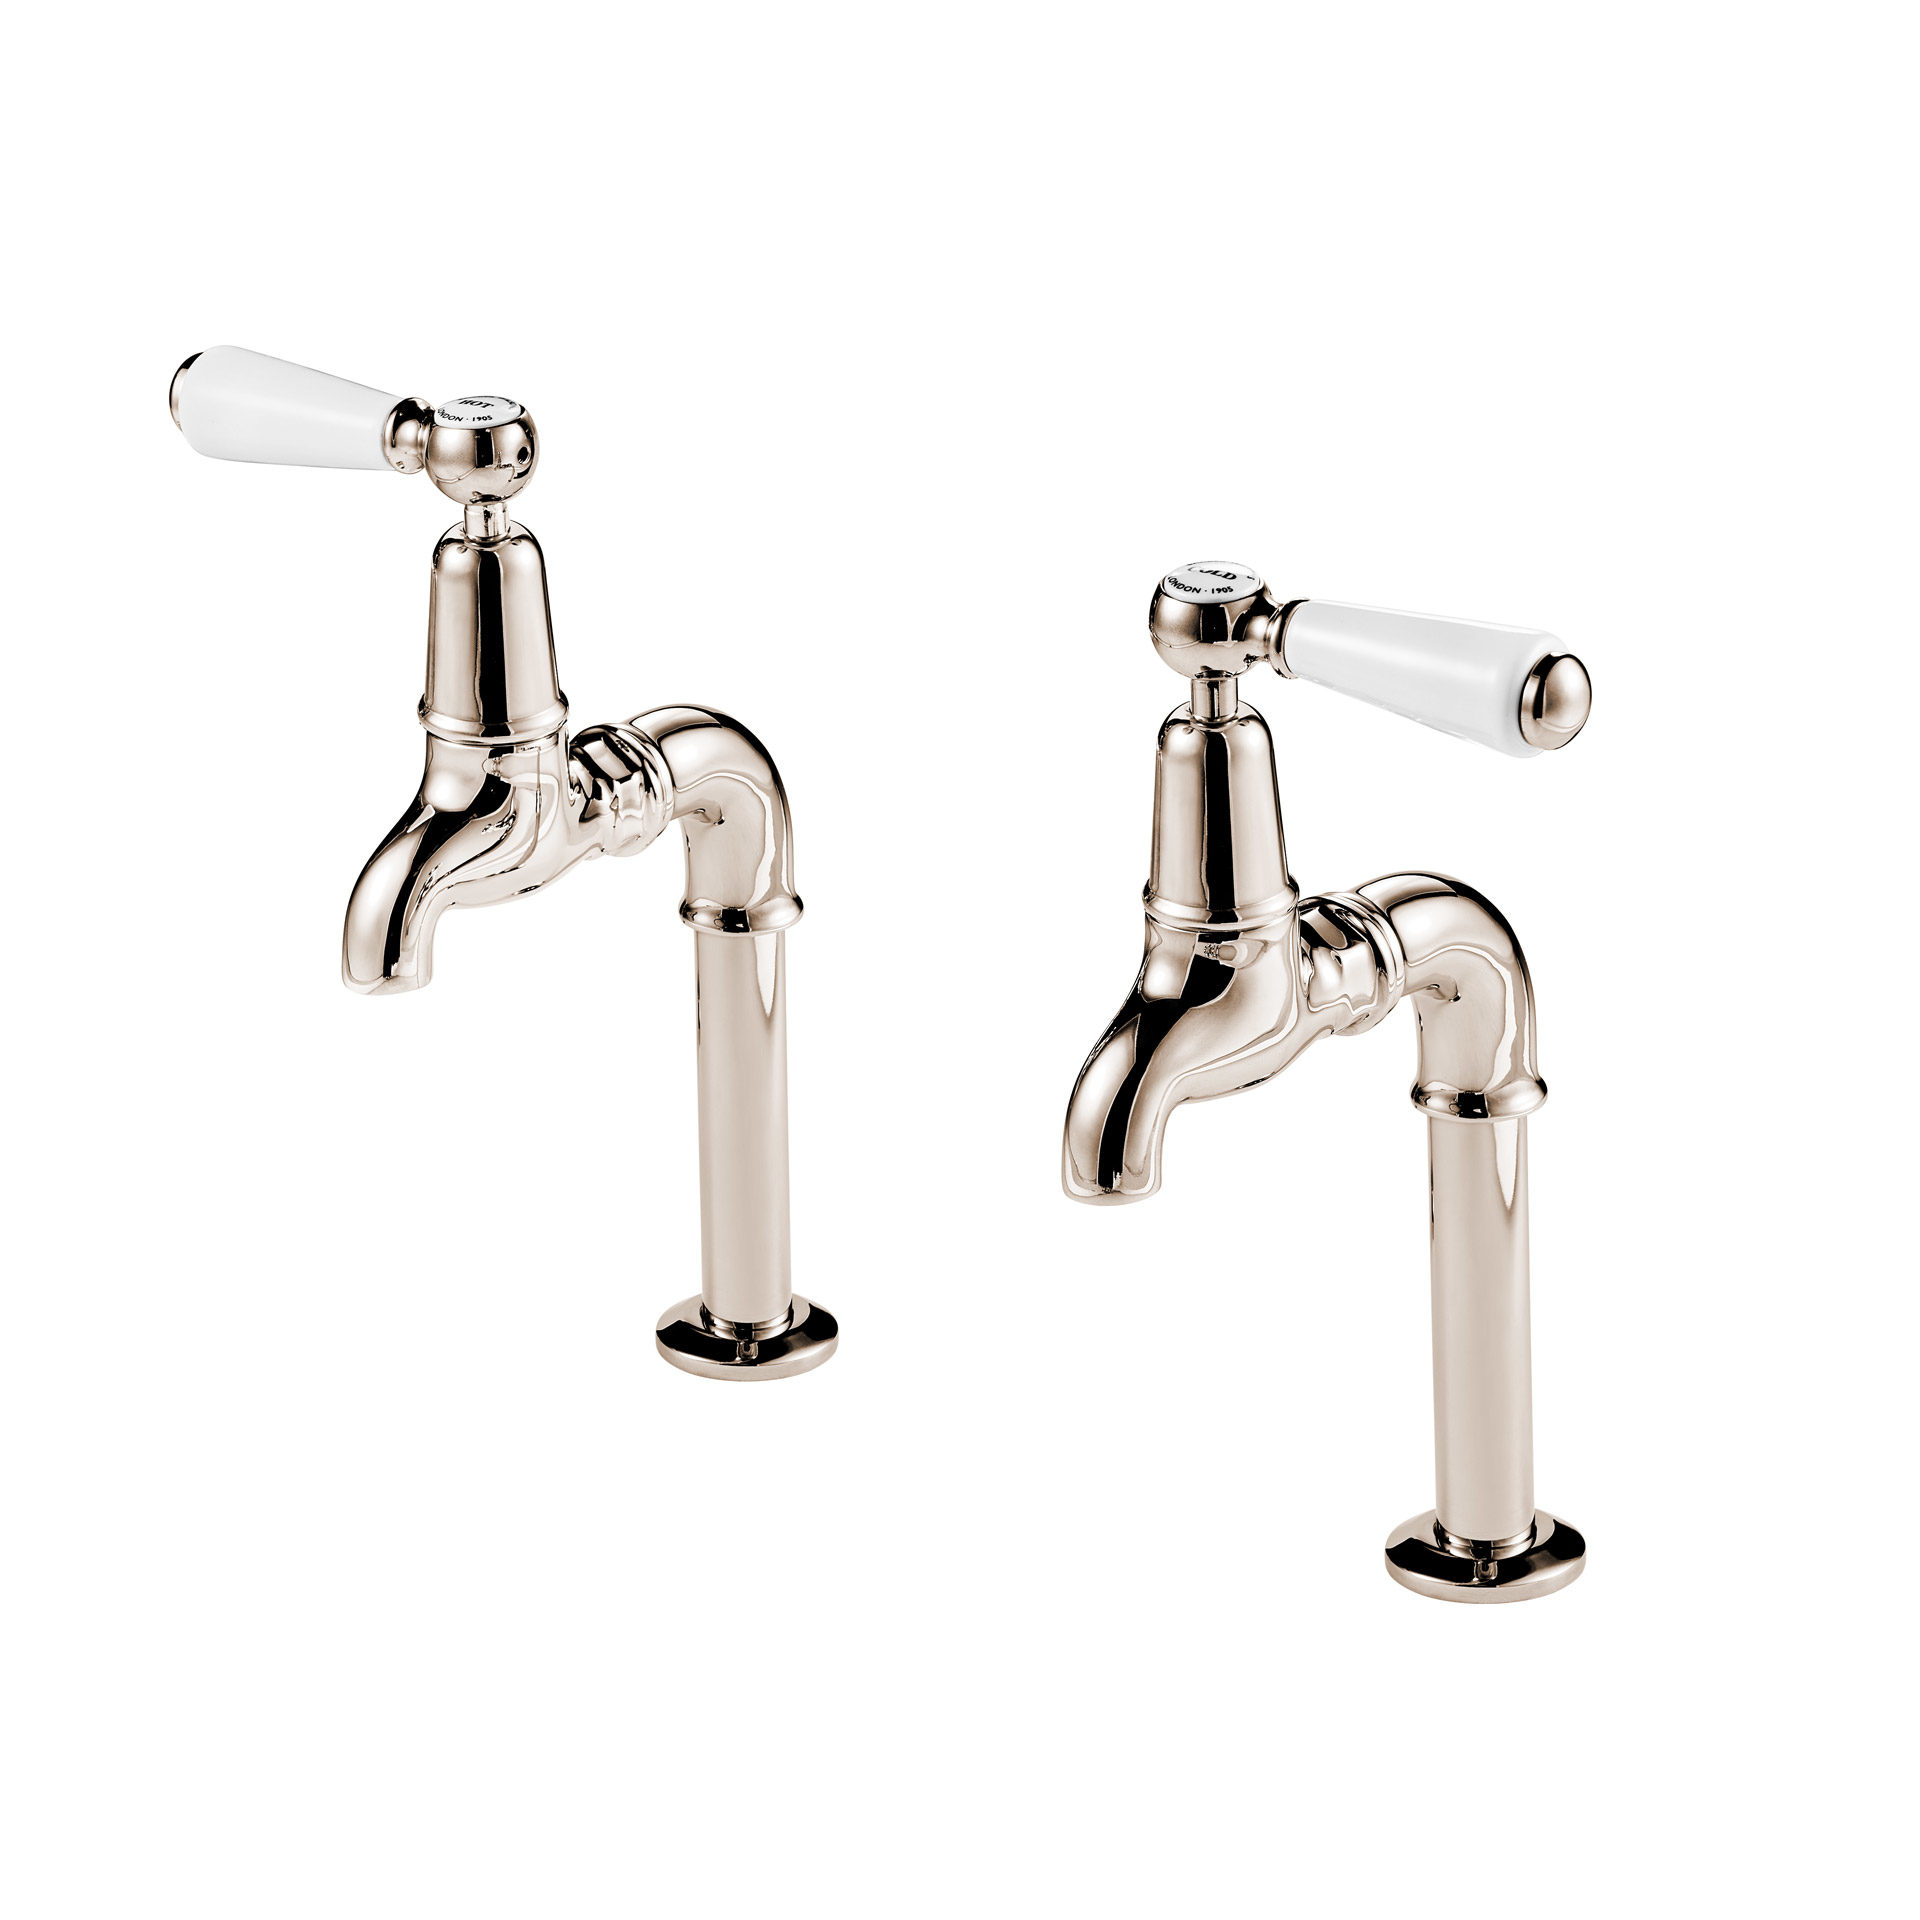 Barber Wilsons 6 Inch Polished Nickel Bib Taps with China Lever - Regent 260, 1900's Style